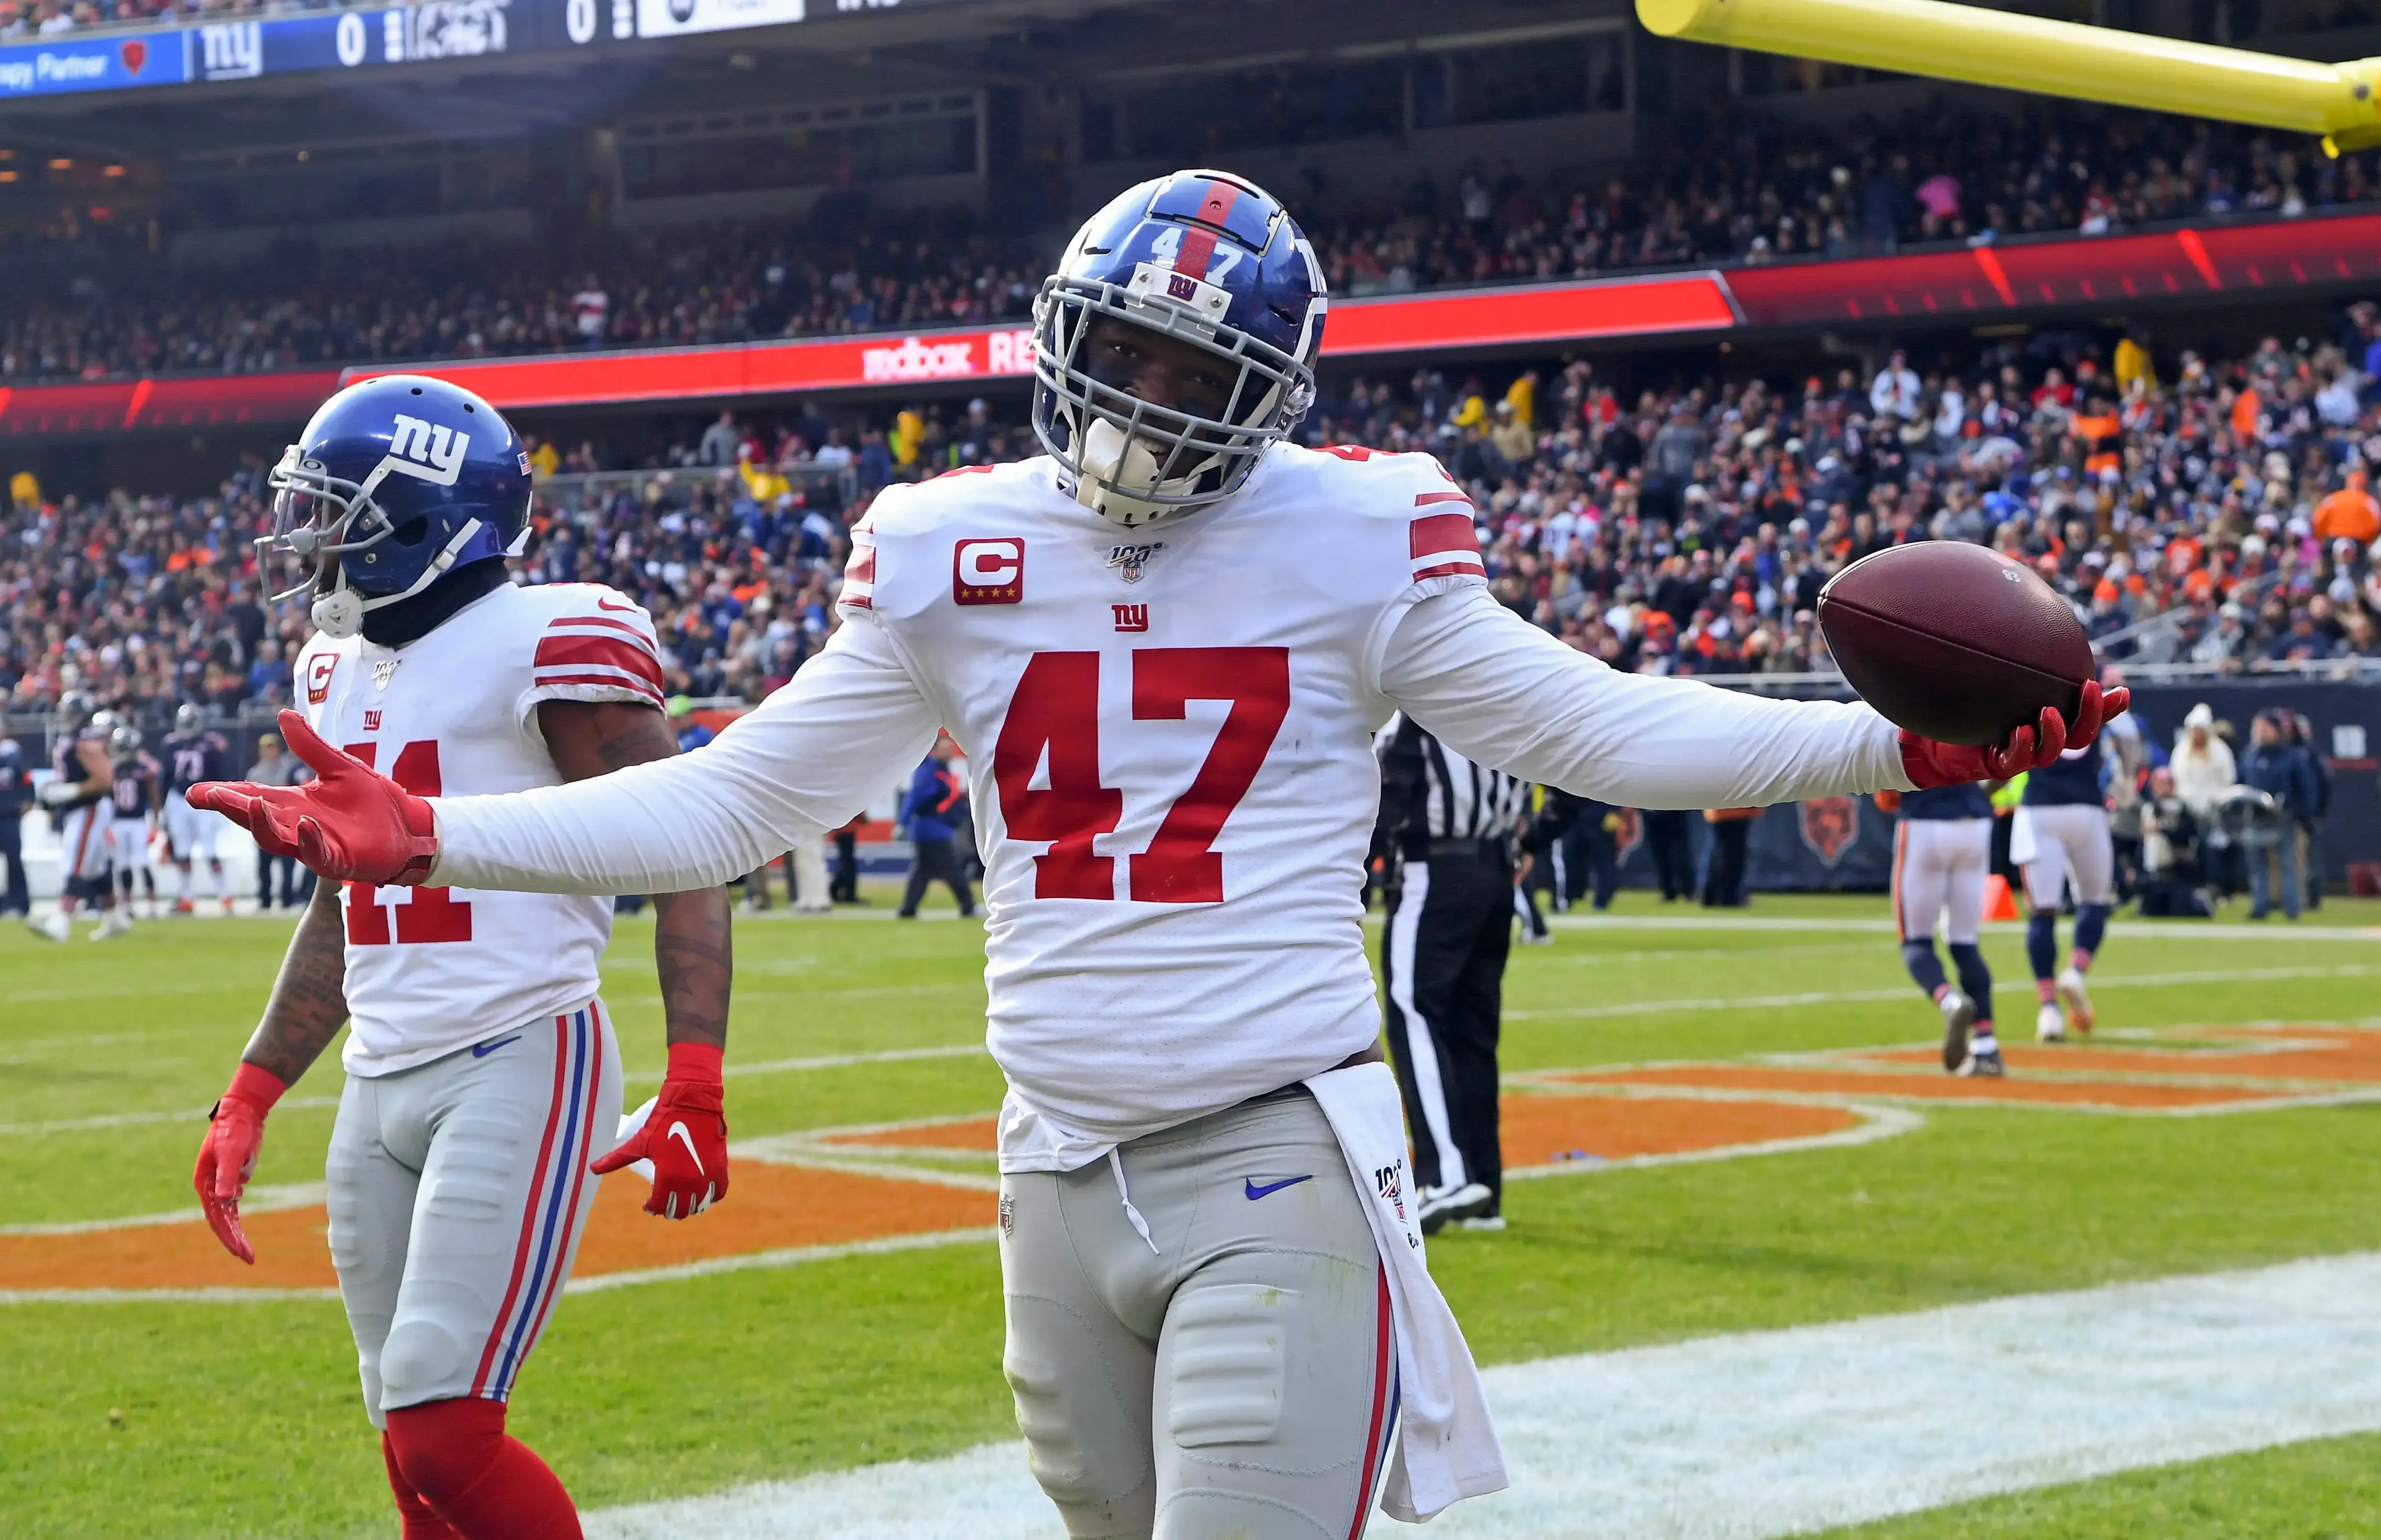 Nov 24, 2019; Chicago, IL, USA; New York Giants outside linebacker Alec Ogletree (47) reacts after making an interception against the Chicago Bears during the first quarter at Soldier Field. / © Mike DiNovo-USA TODAY Sports